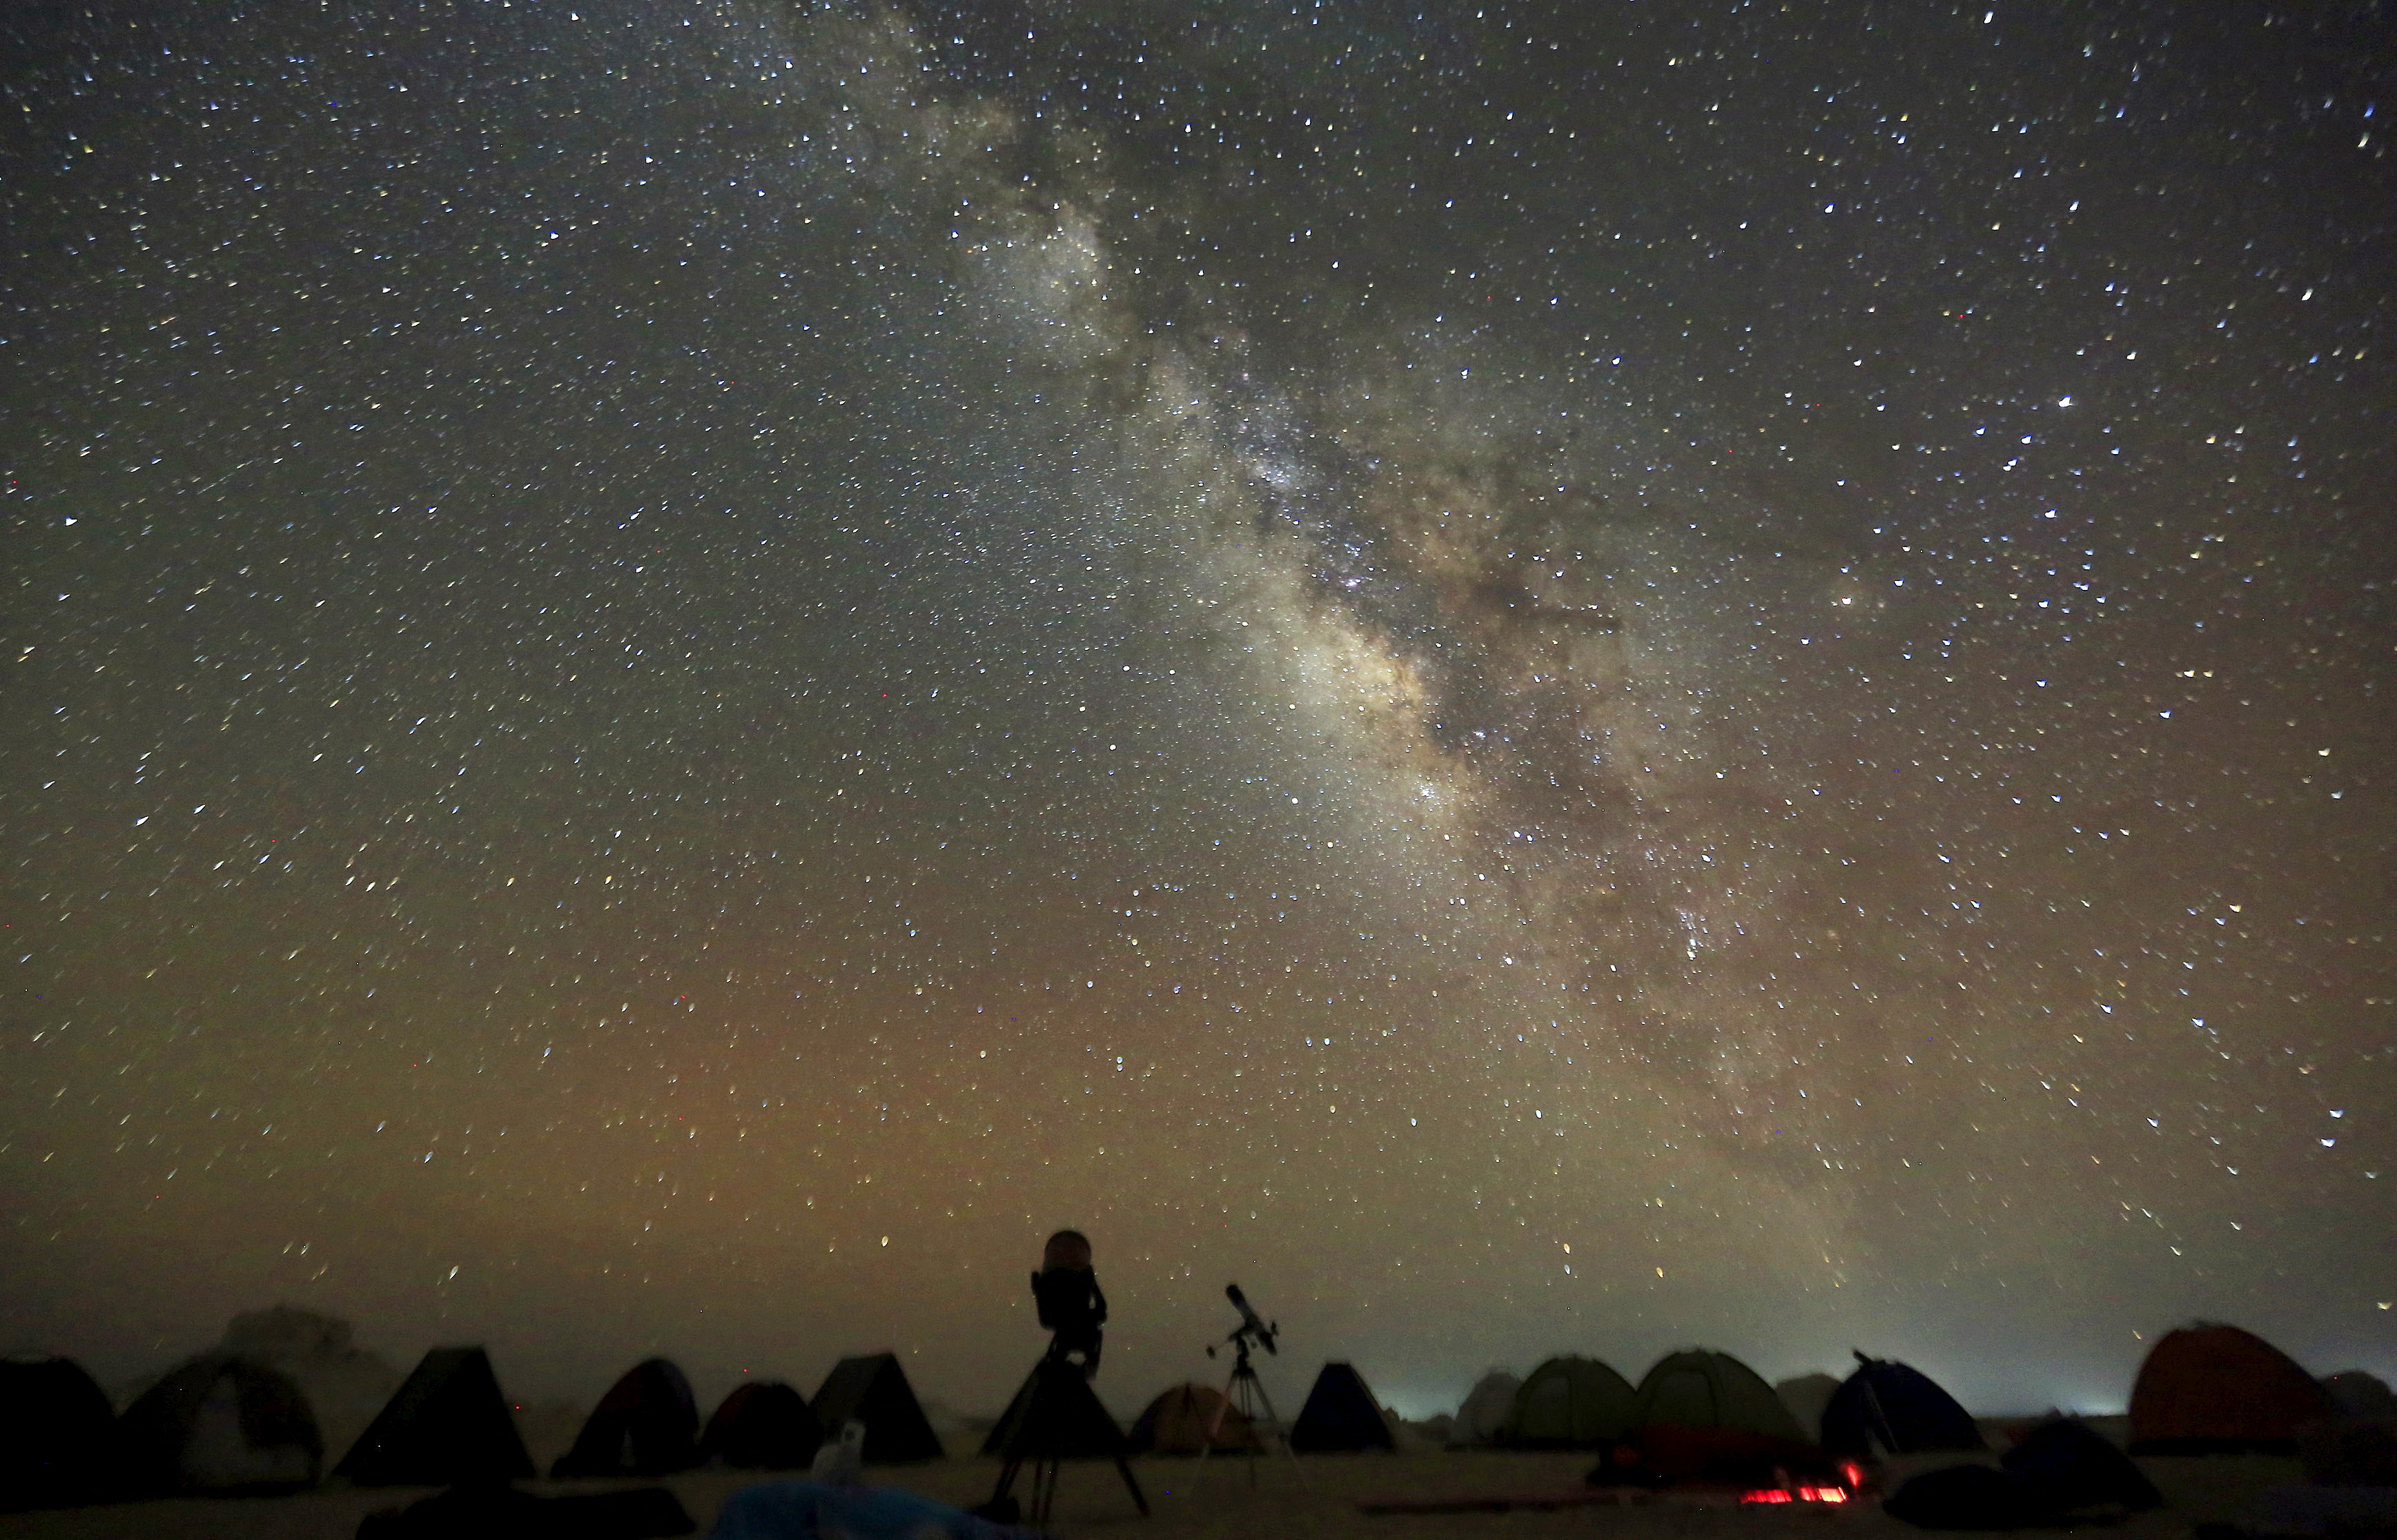 The Milky Way galaxy is seen in the night sky around telescopes and camps of people over rocks in the White Desert north of the Farafra Oasis southwest of Cairo